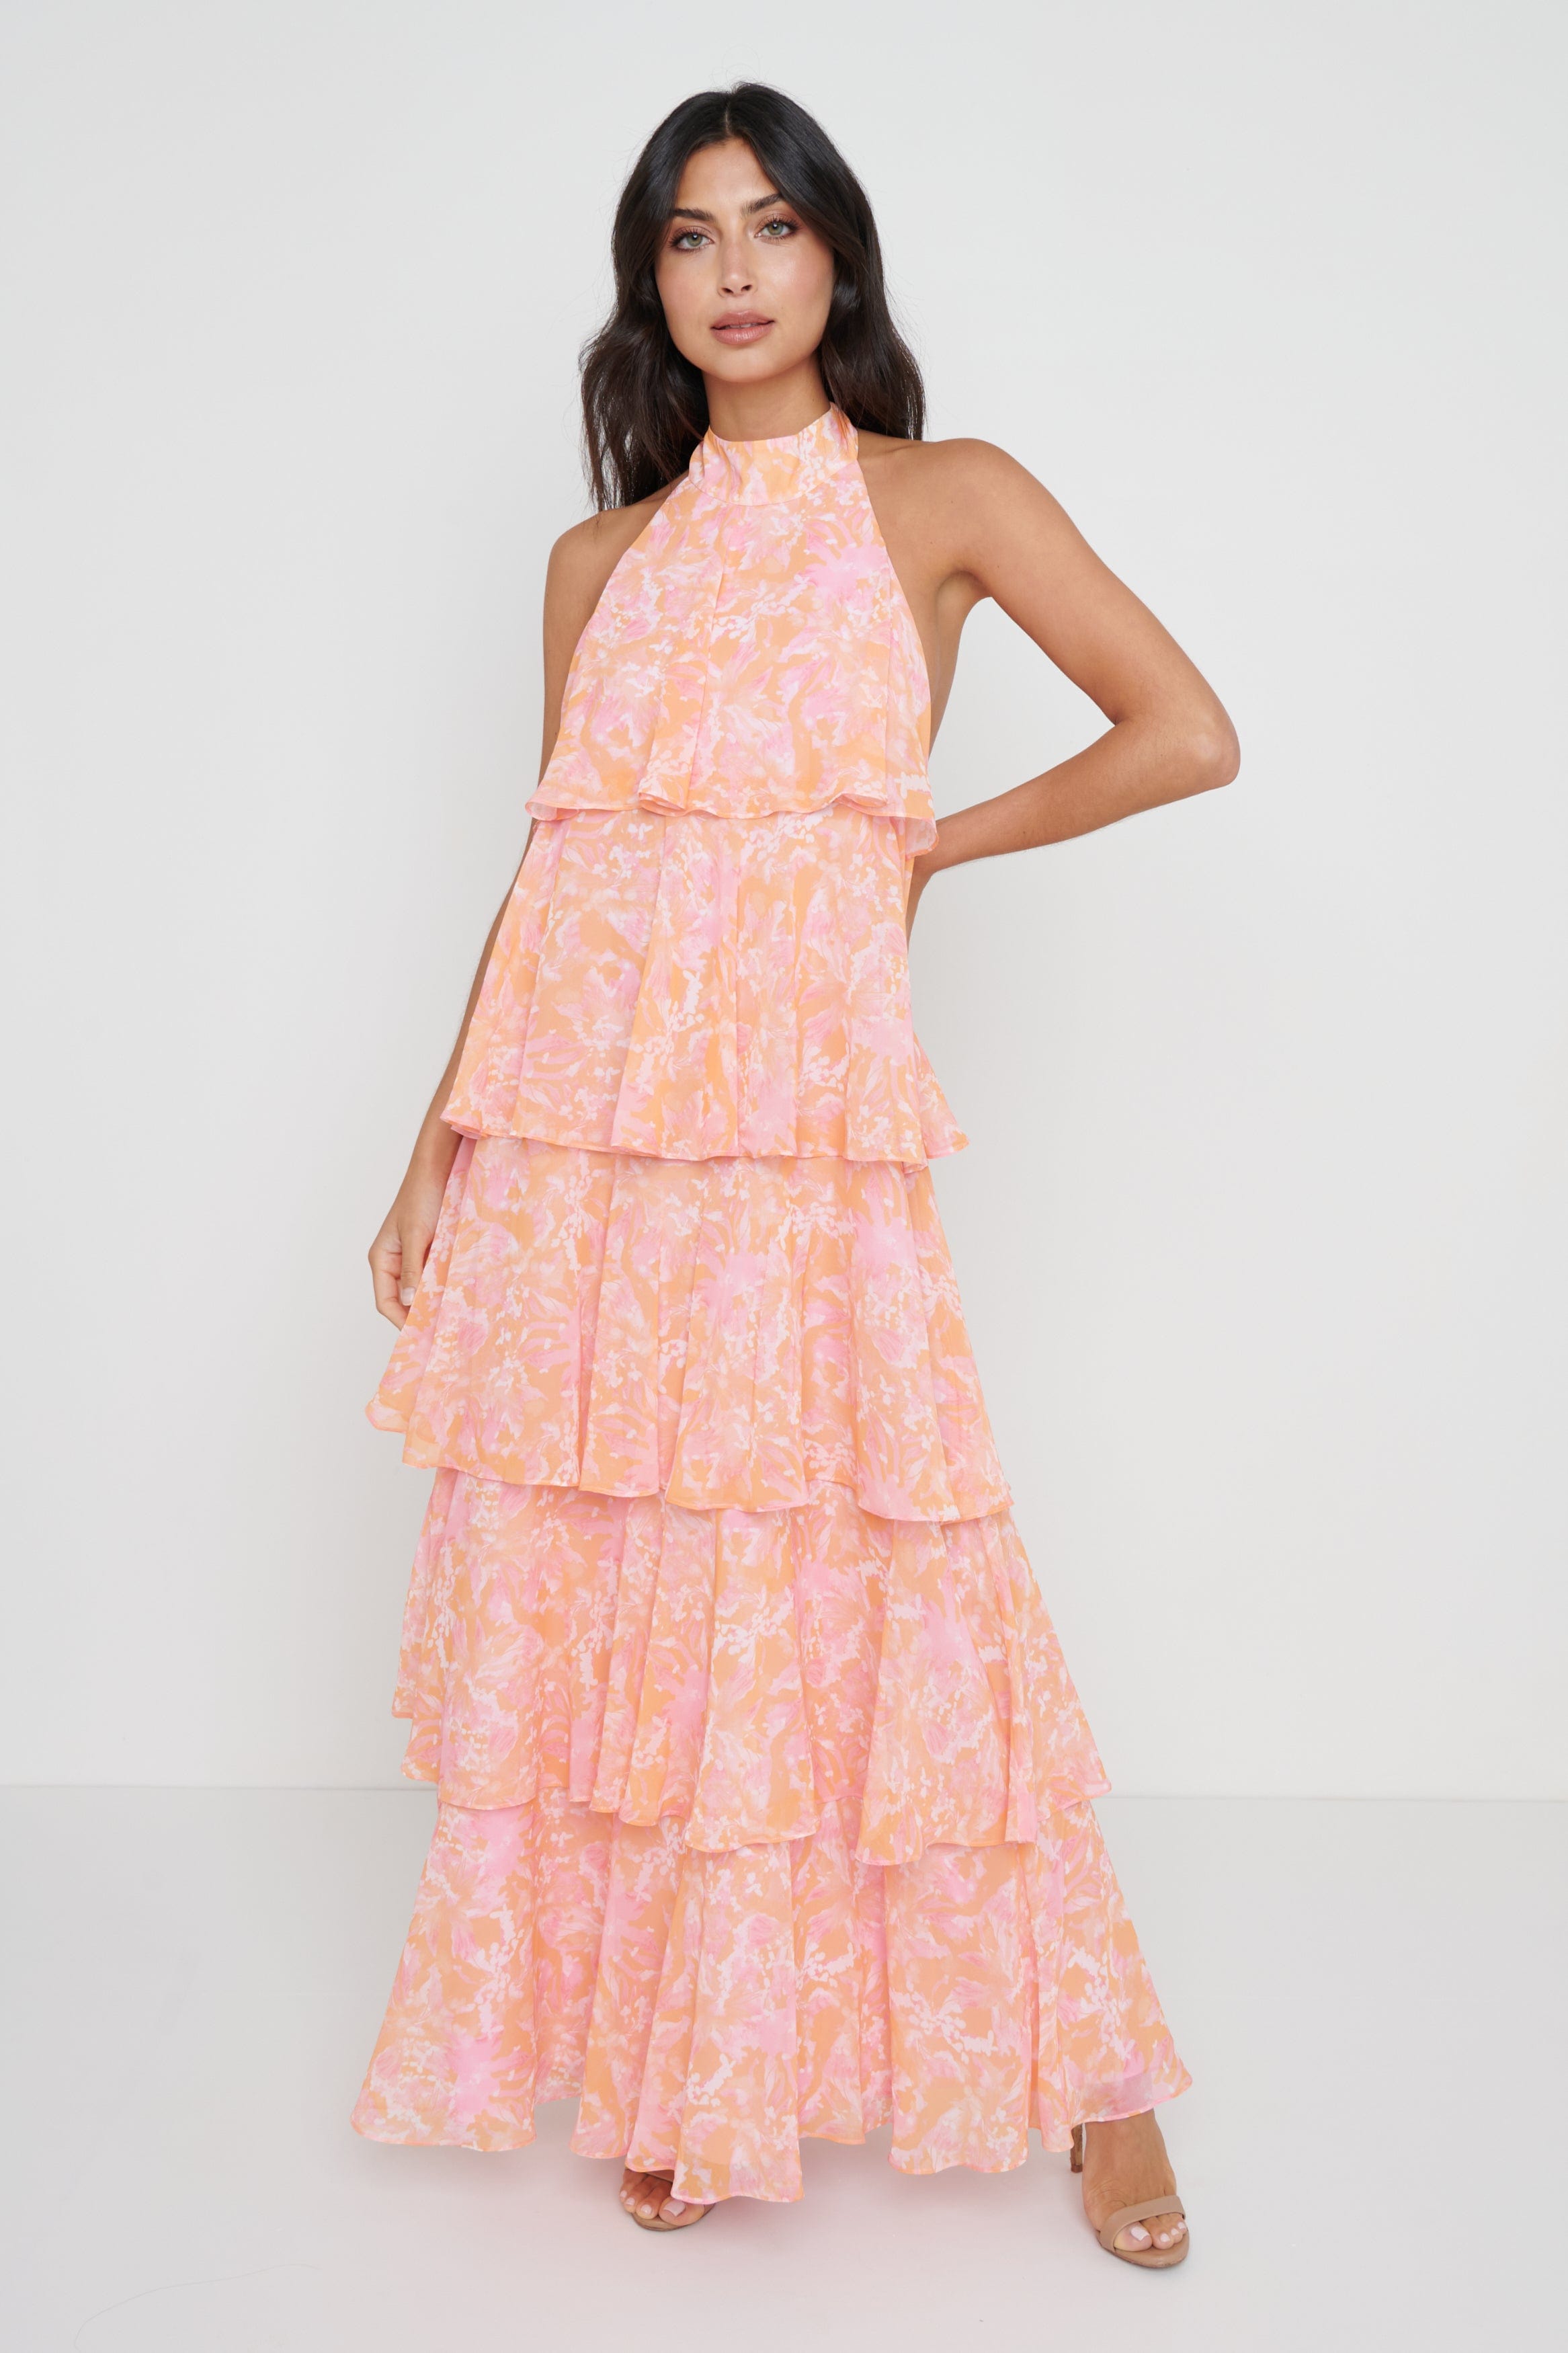 Thea Halter Neck Ruffle Dress - Pink and Orange Floral, 10